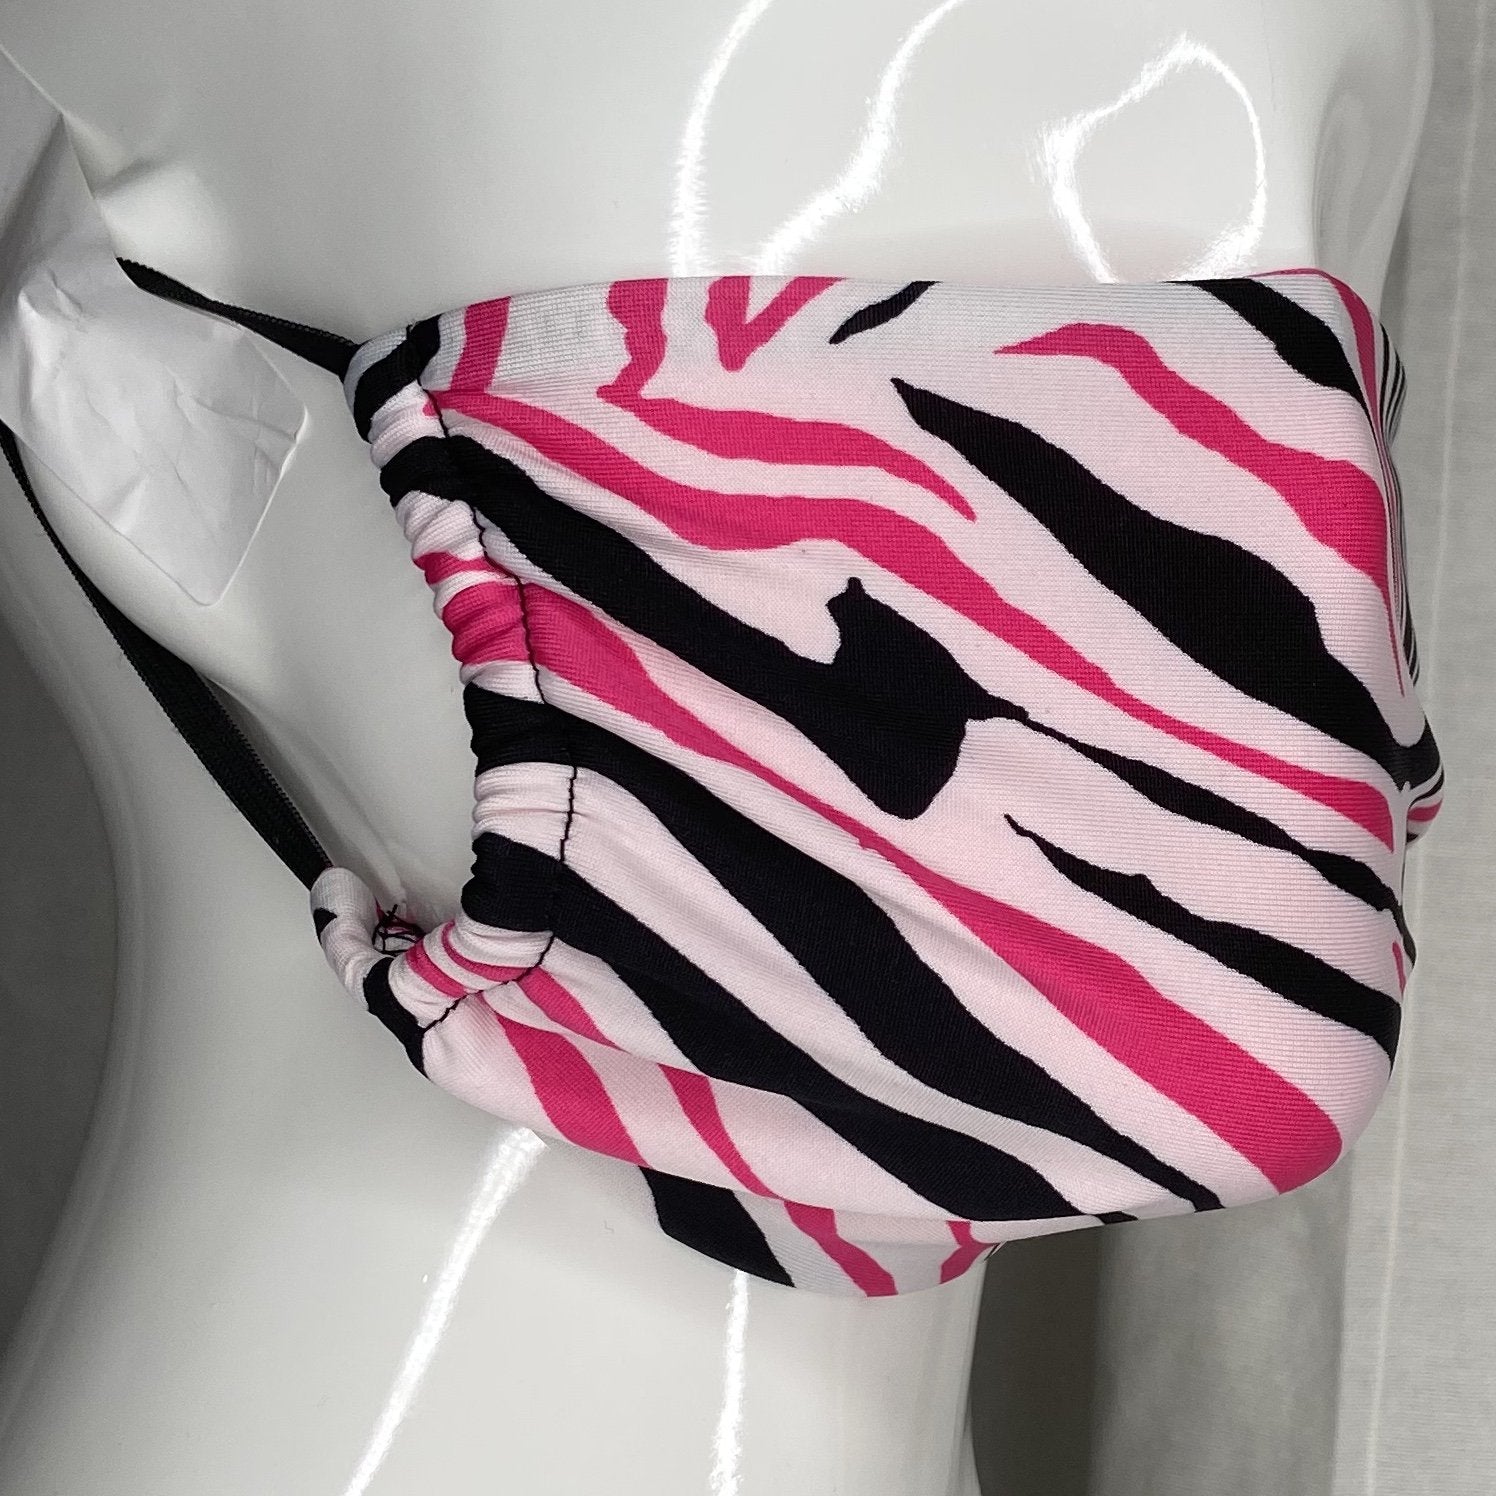 Fashion Mask (Pink/Black Zebra) In Stock-Boughie Curves-Boughie